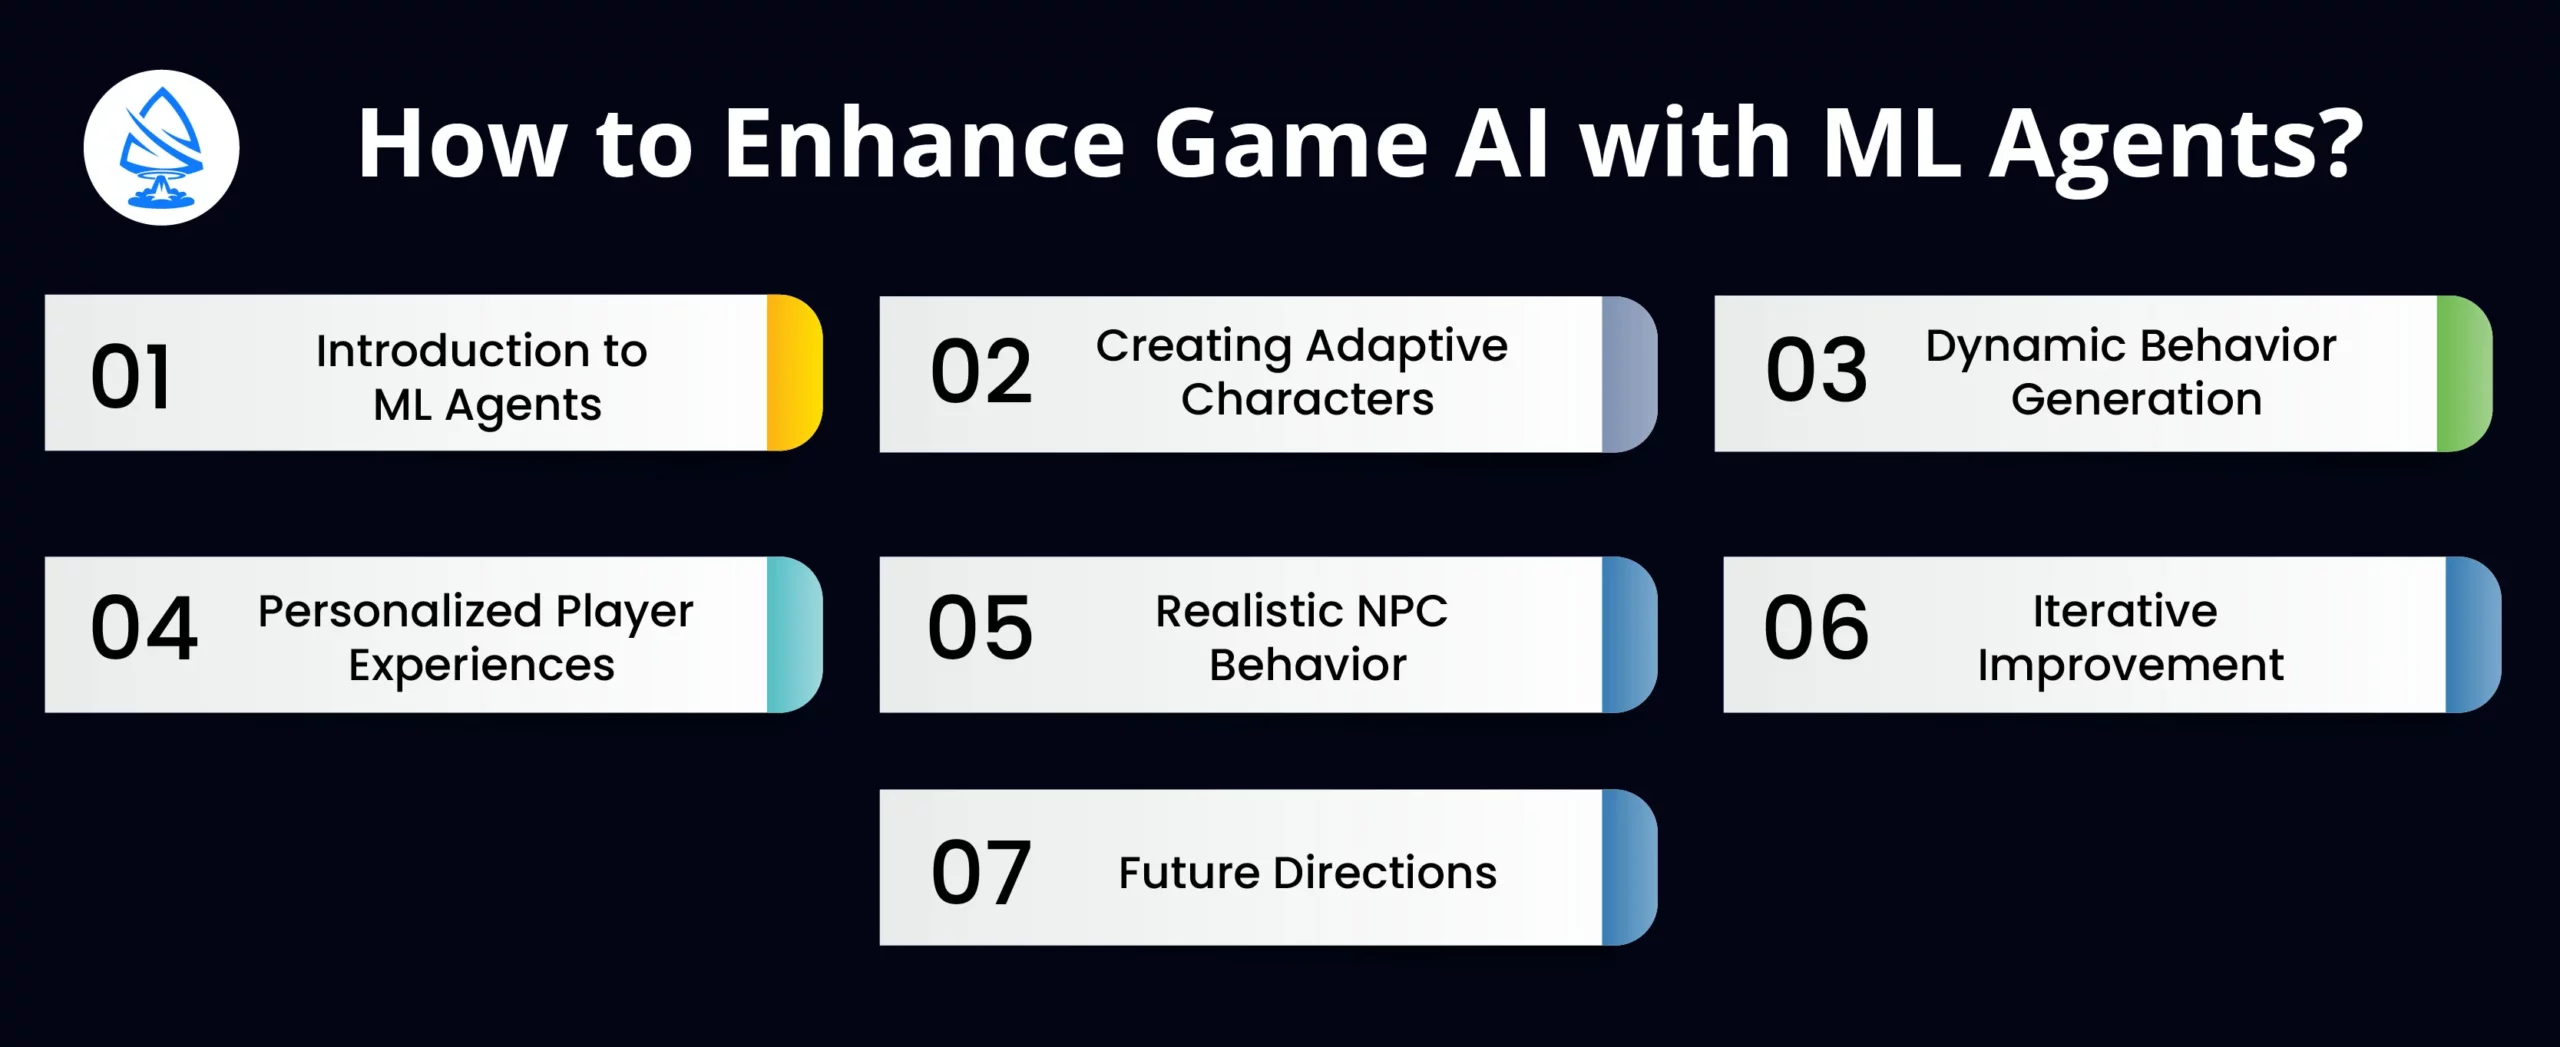 Enhancing Game AI with ML Agents 